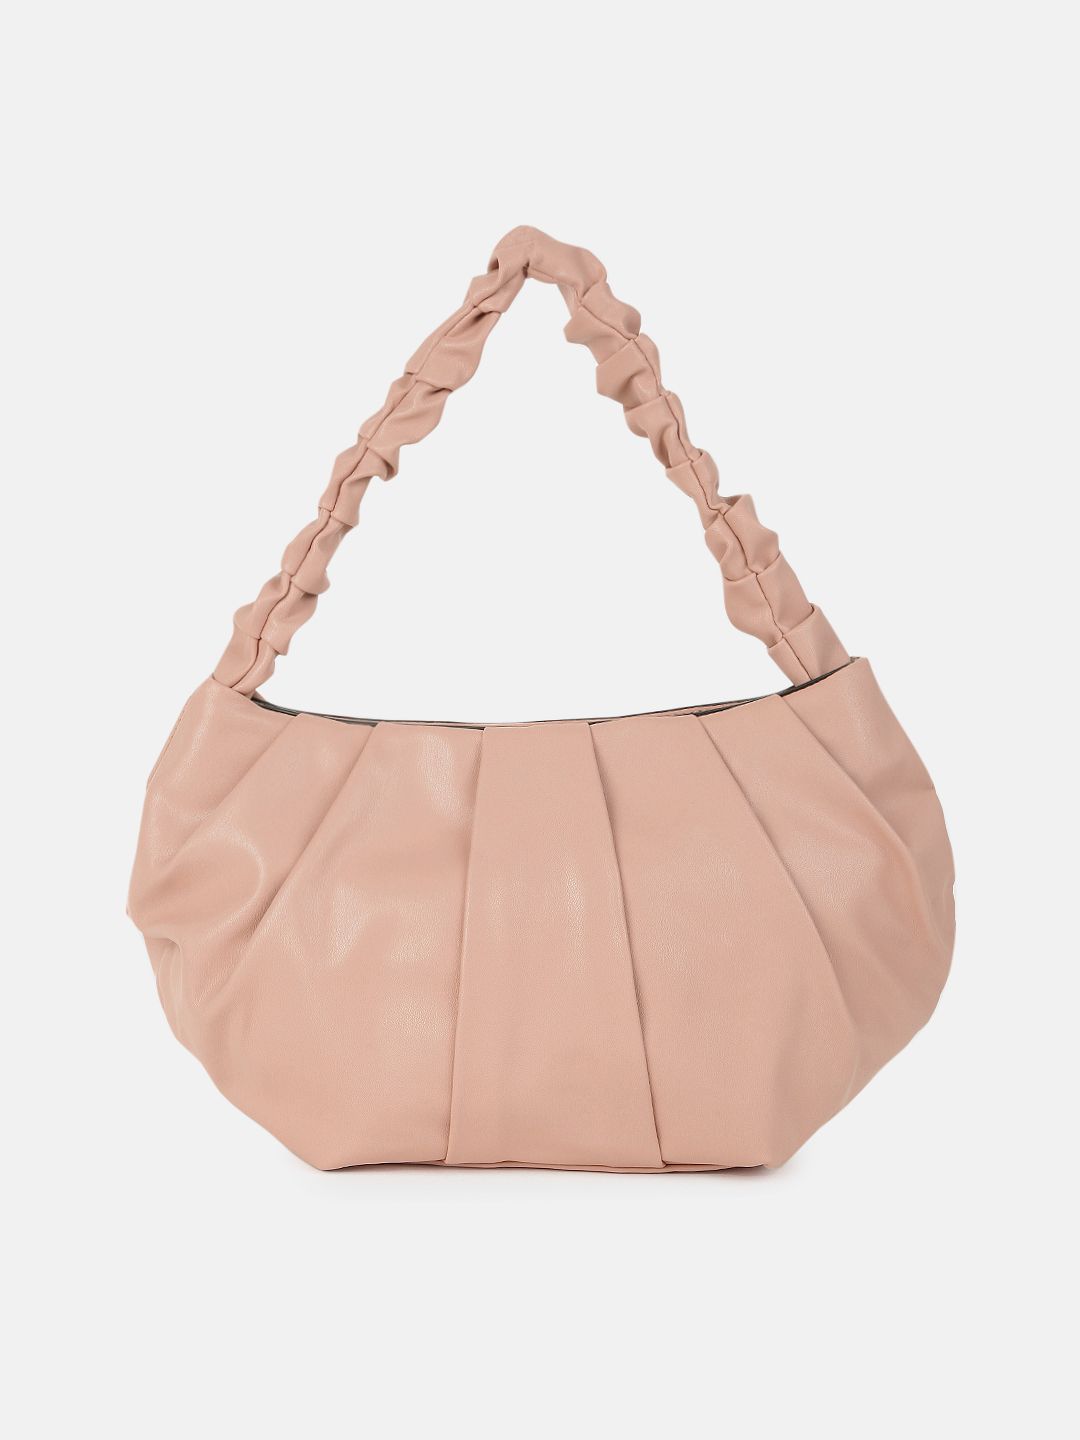 DressBerry Pink PU Structured Handheld Bag Price in India